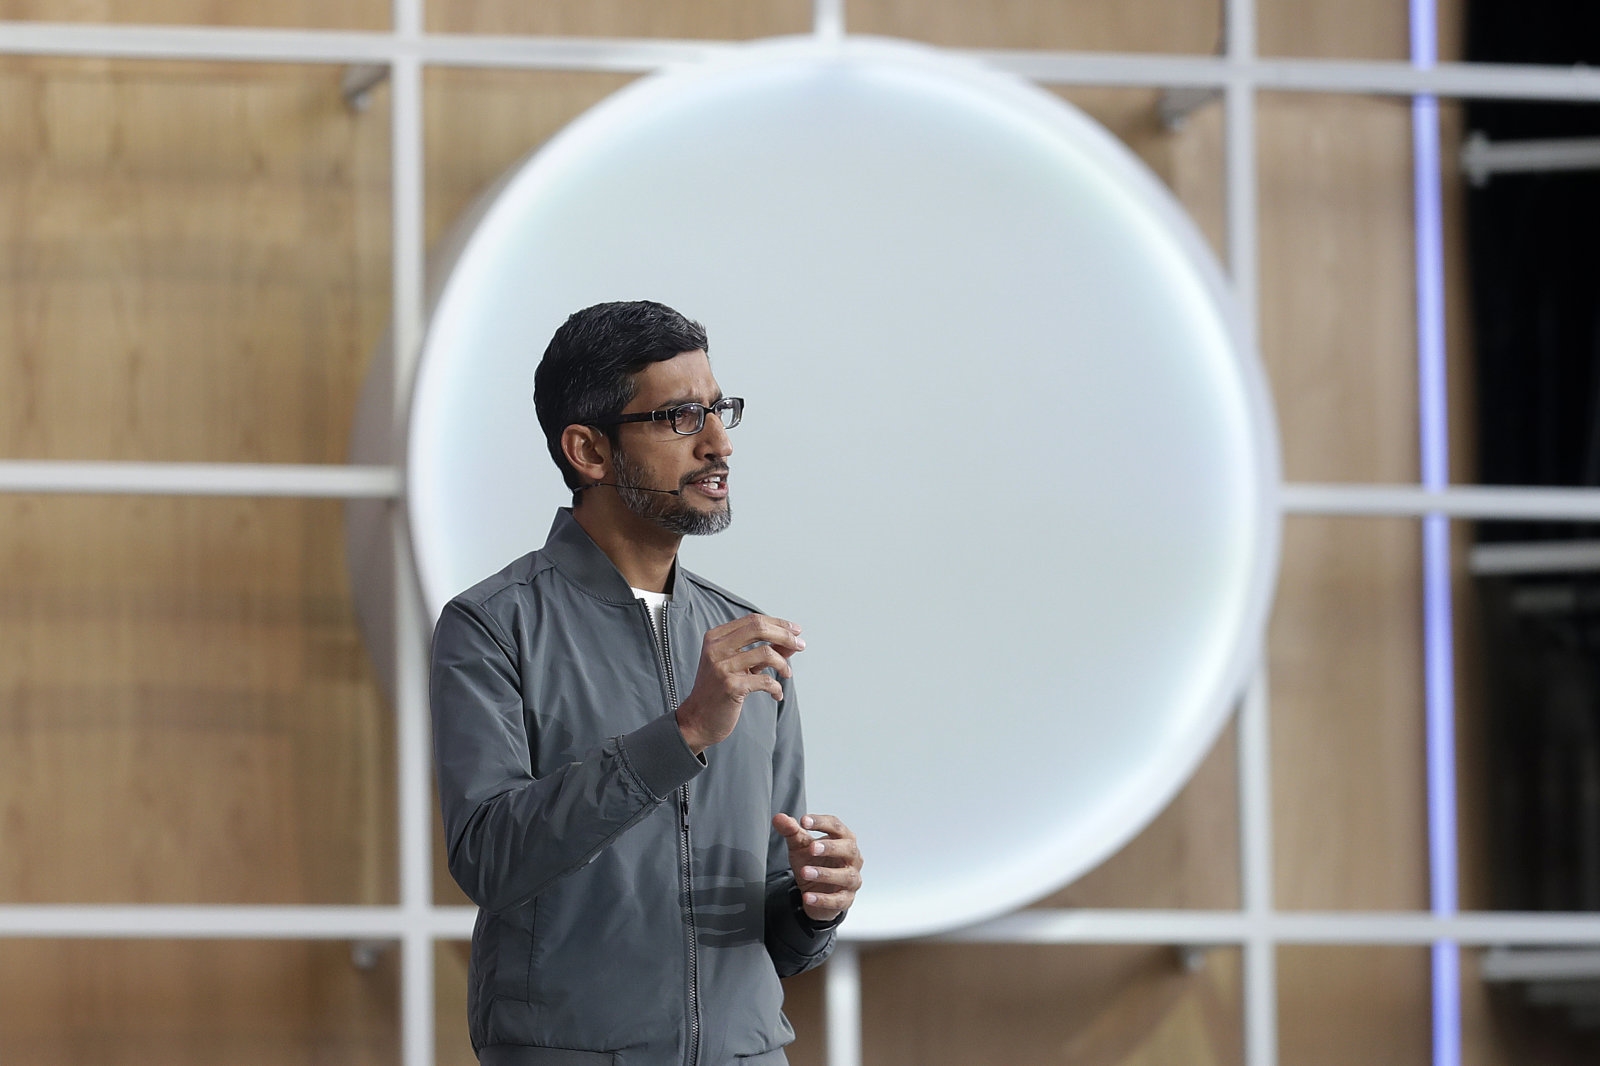 Google scales back town hall meetings following leaks | DeviceDaily.com